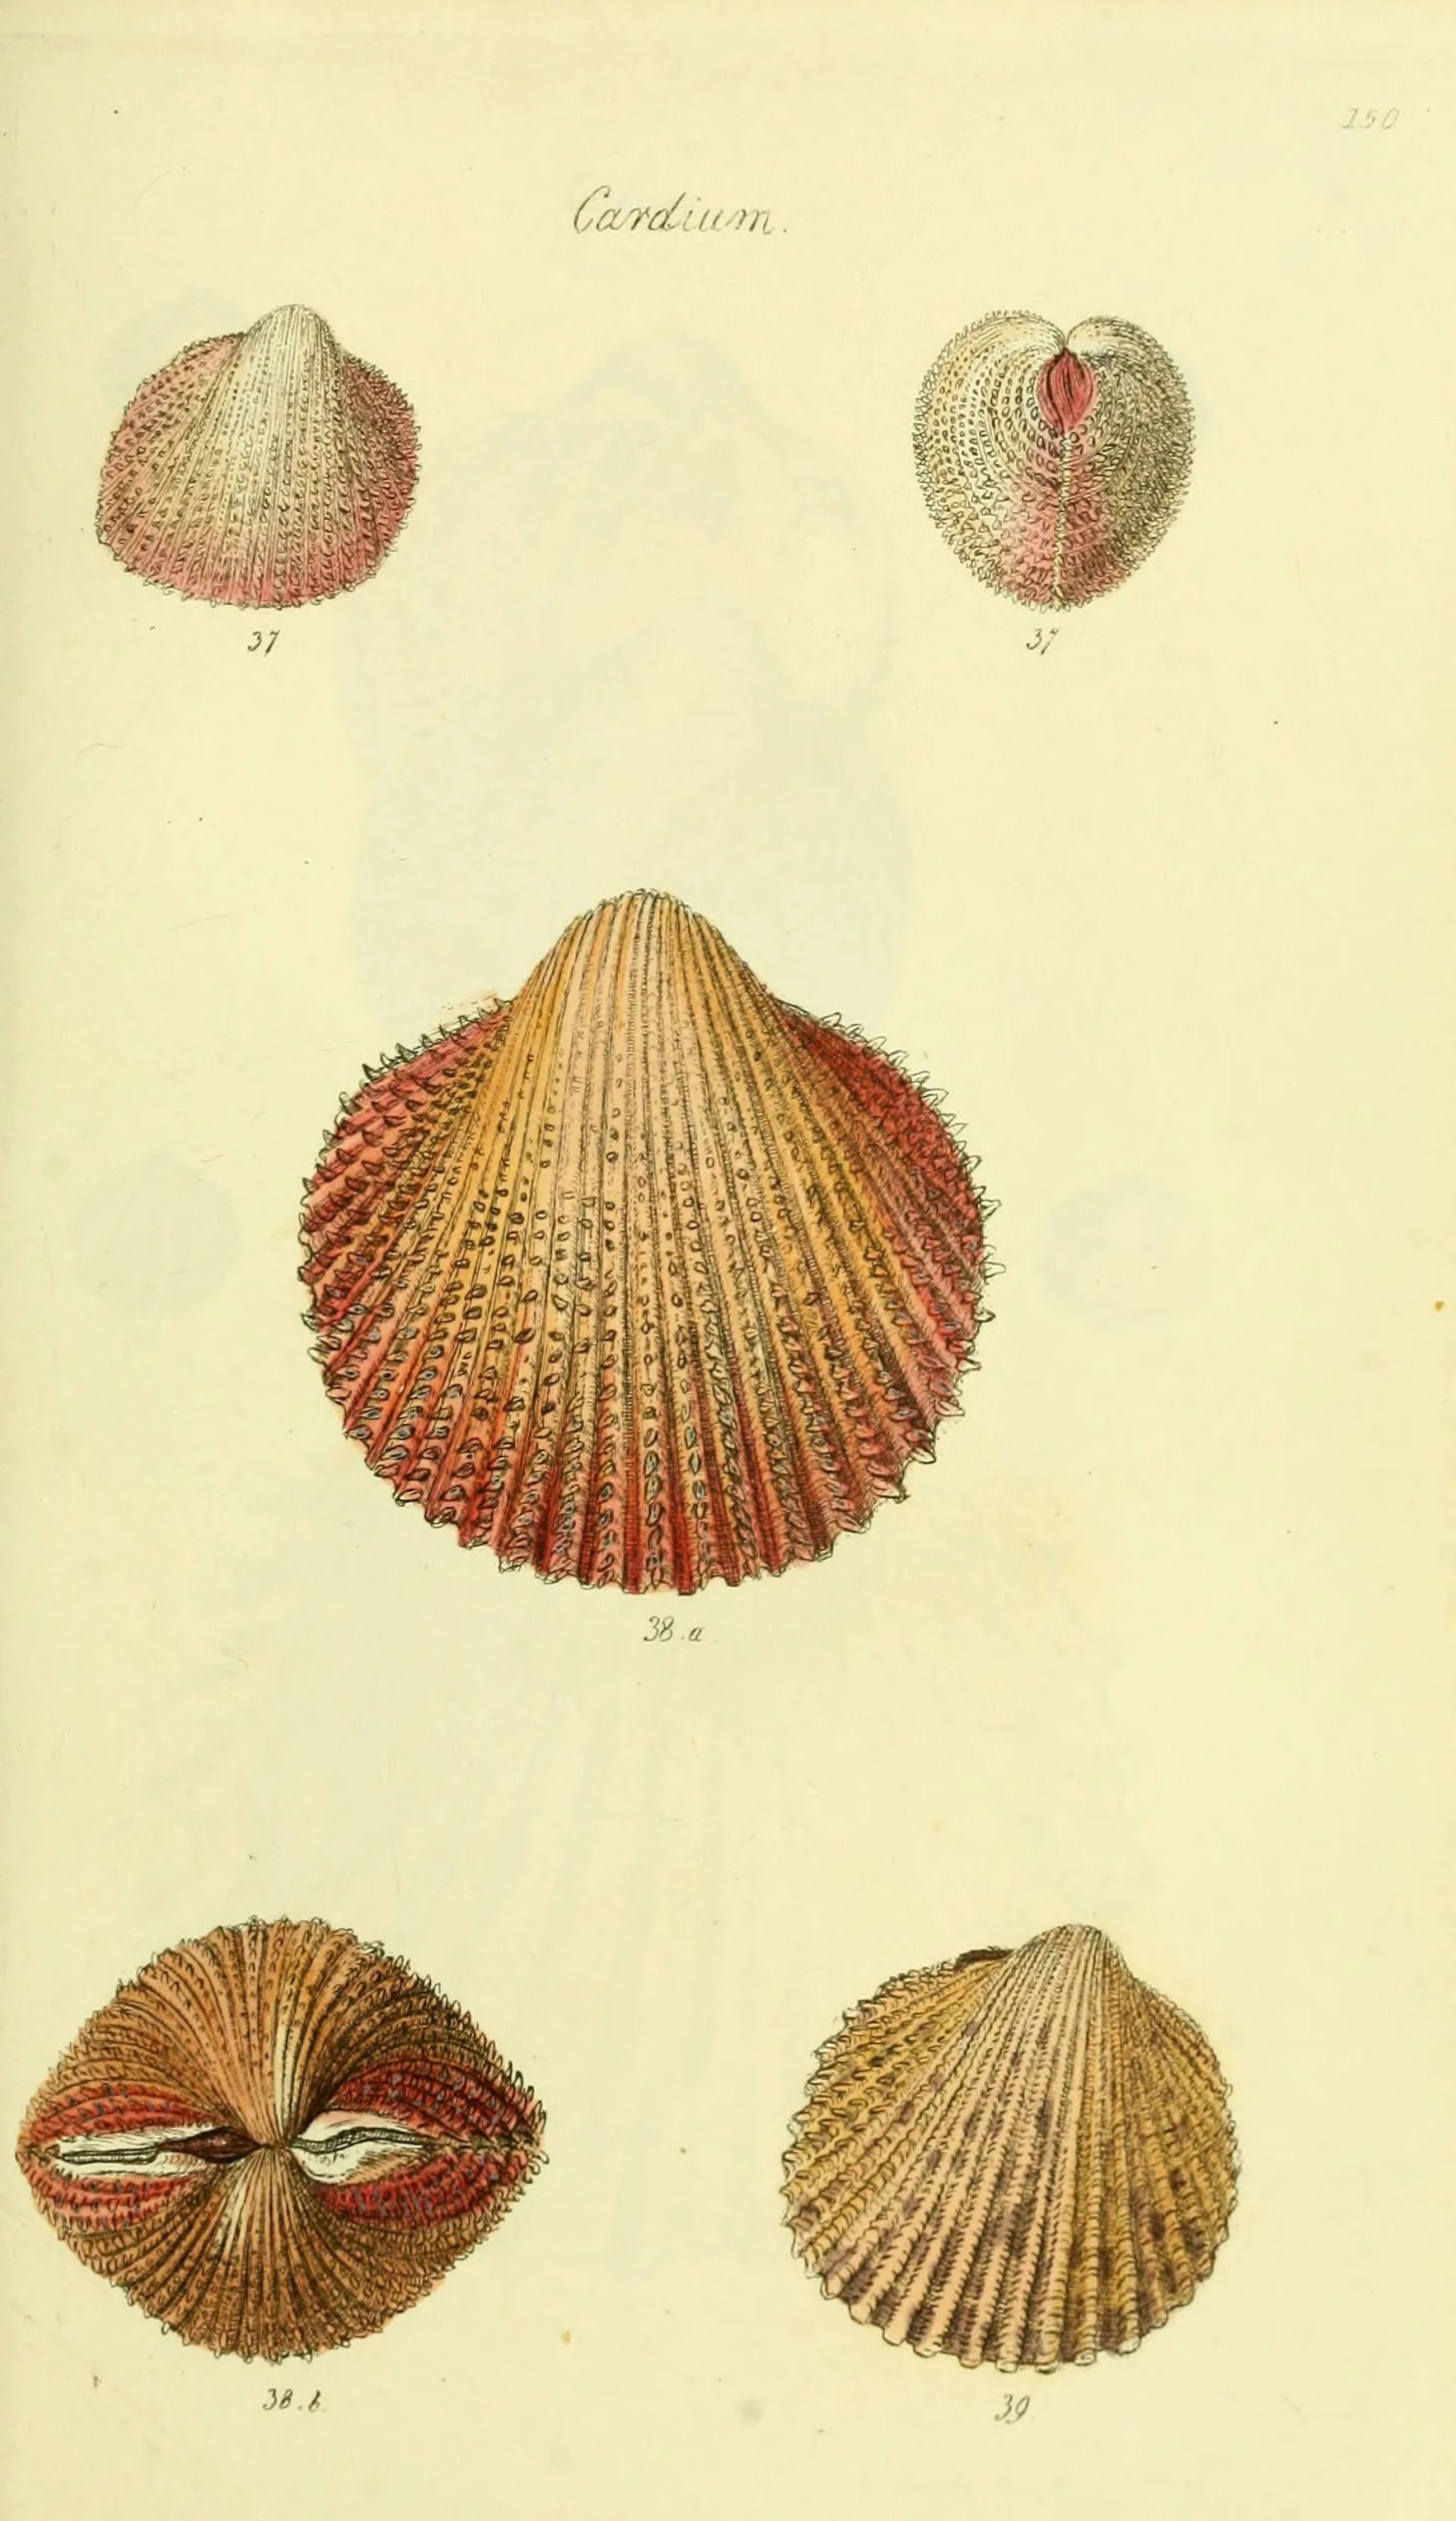 a group of four seashells drawn in red ink on parchment paper